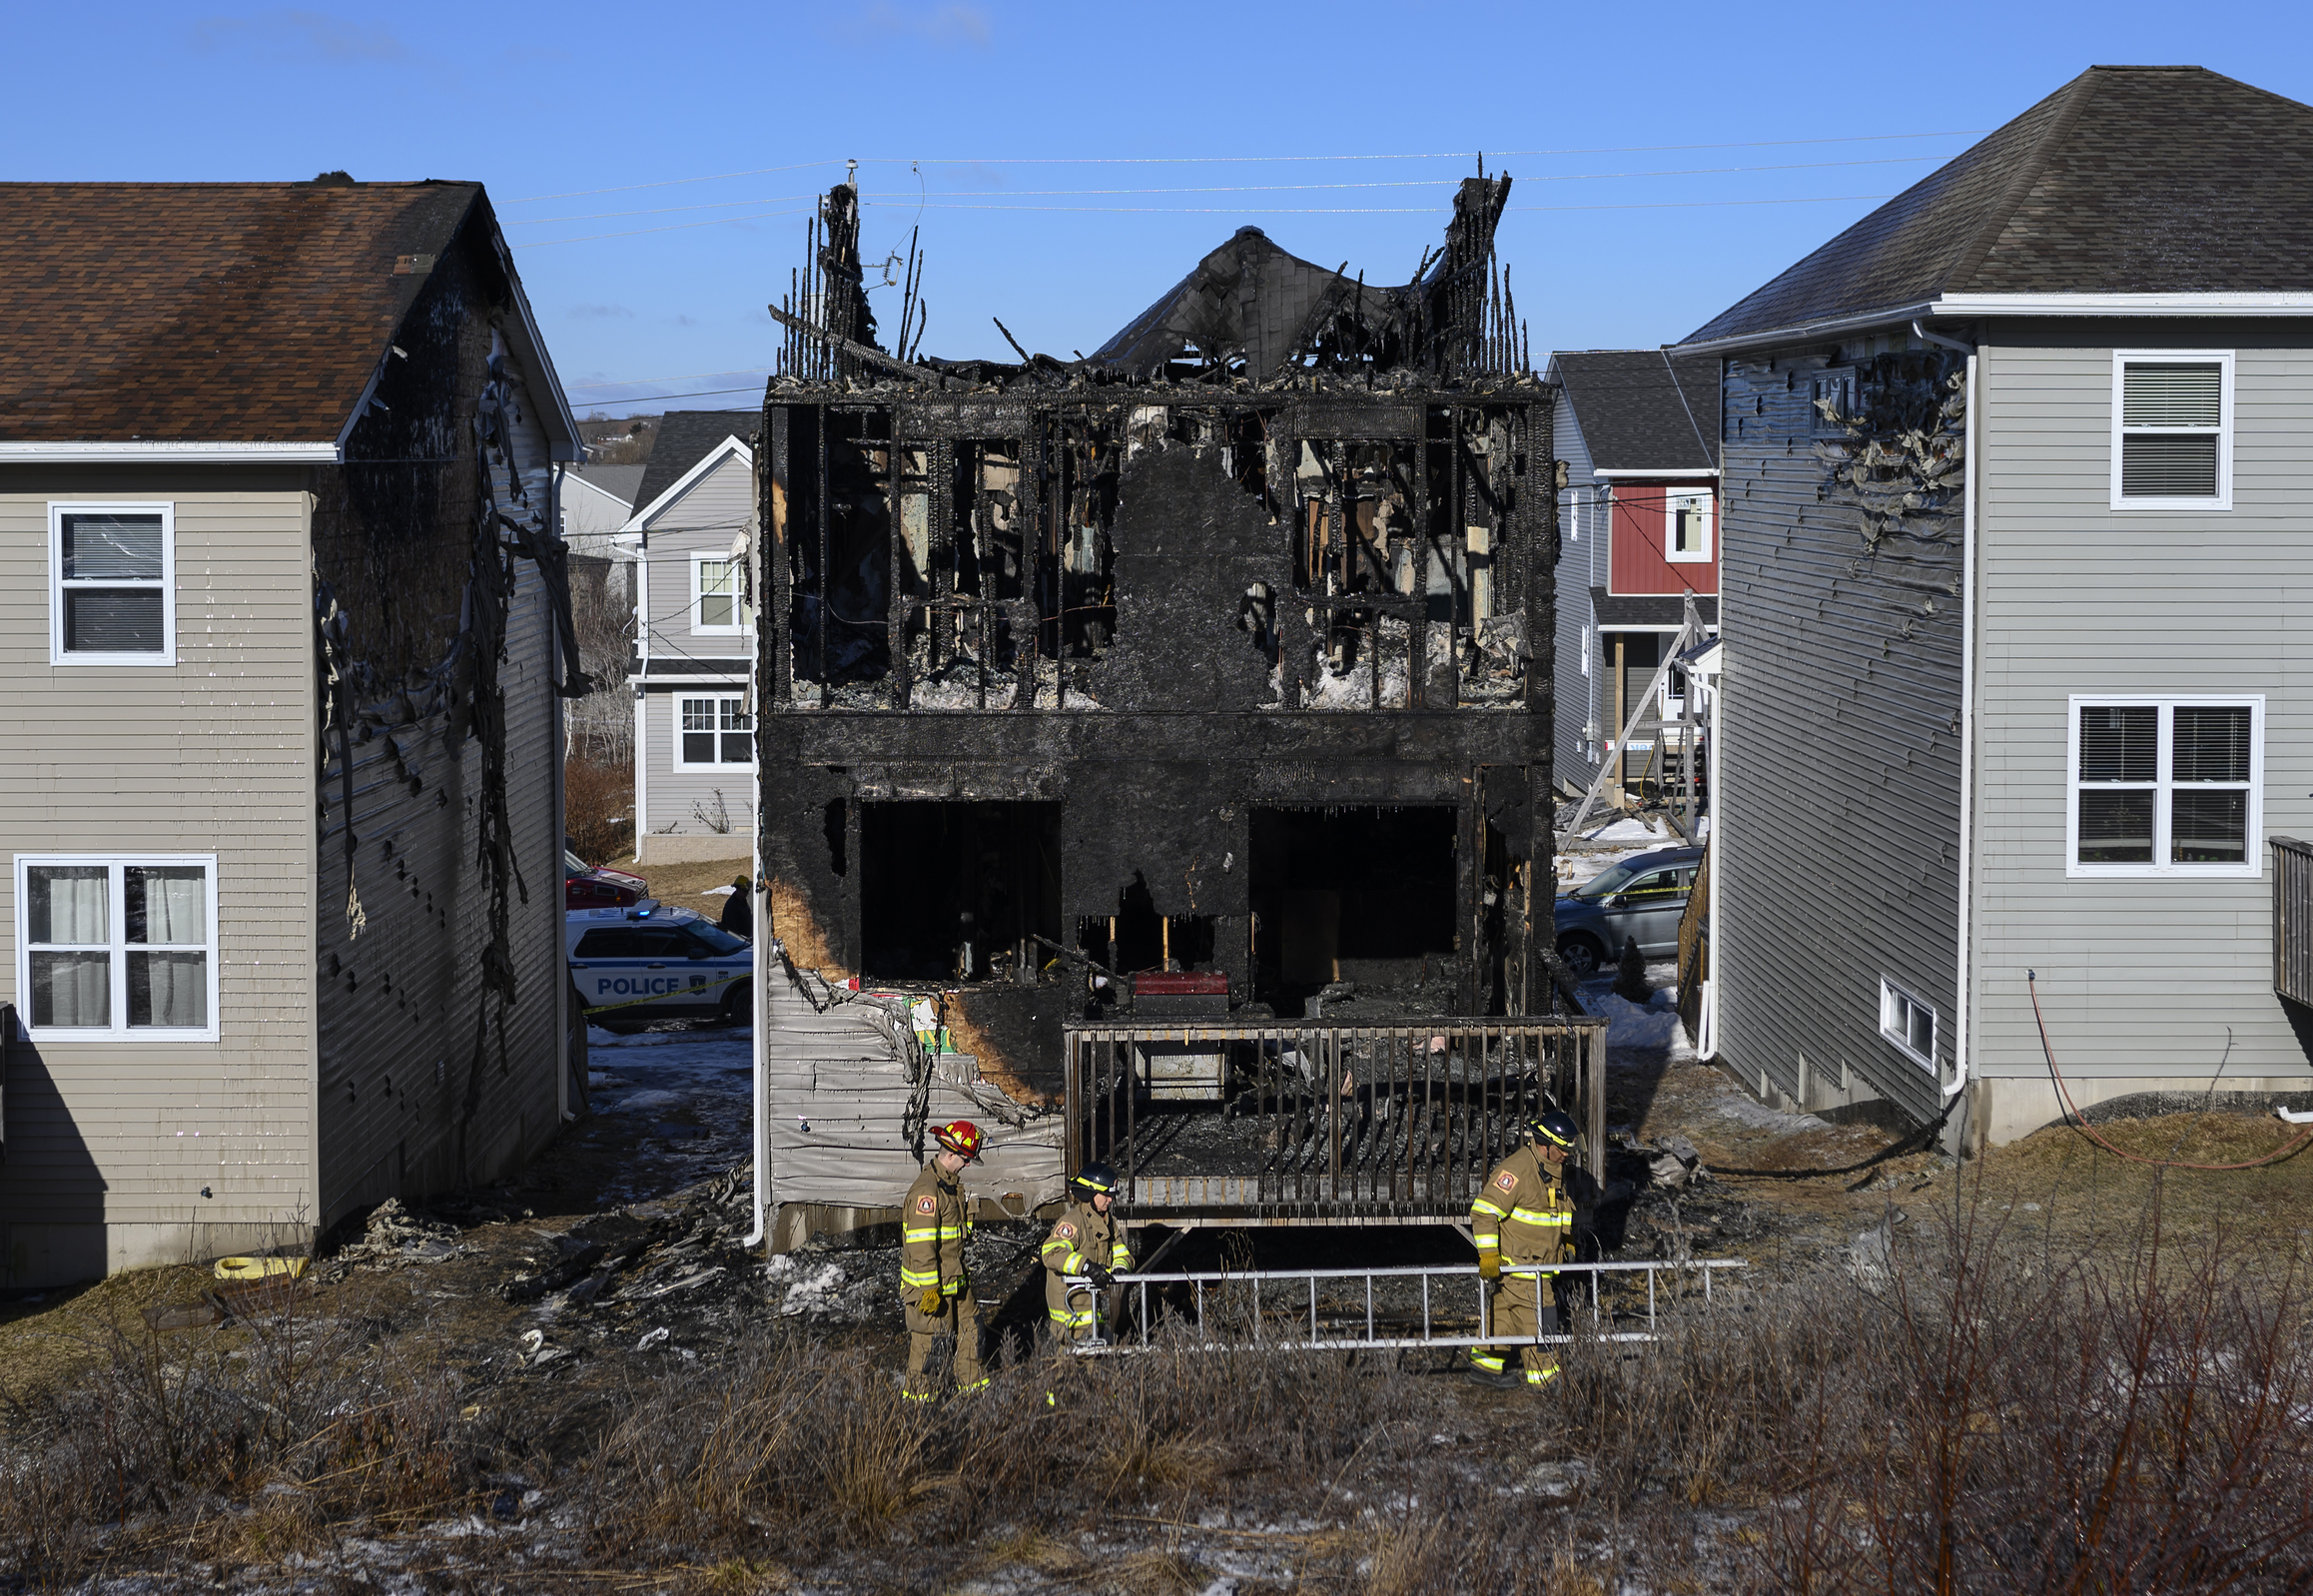 Seven children from same family die in Canada house fire